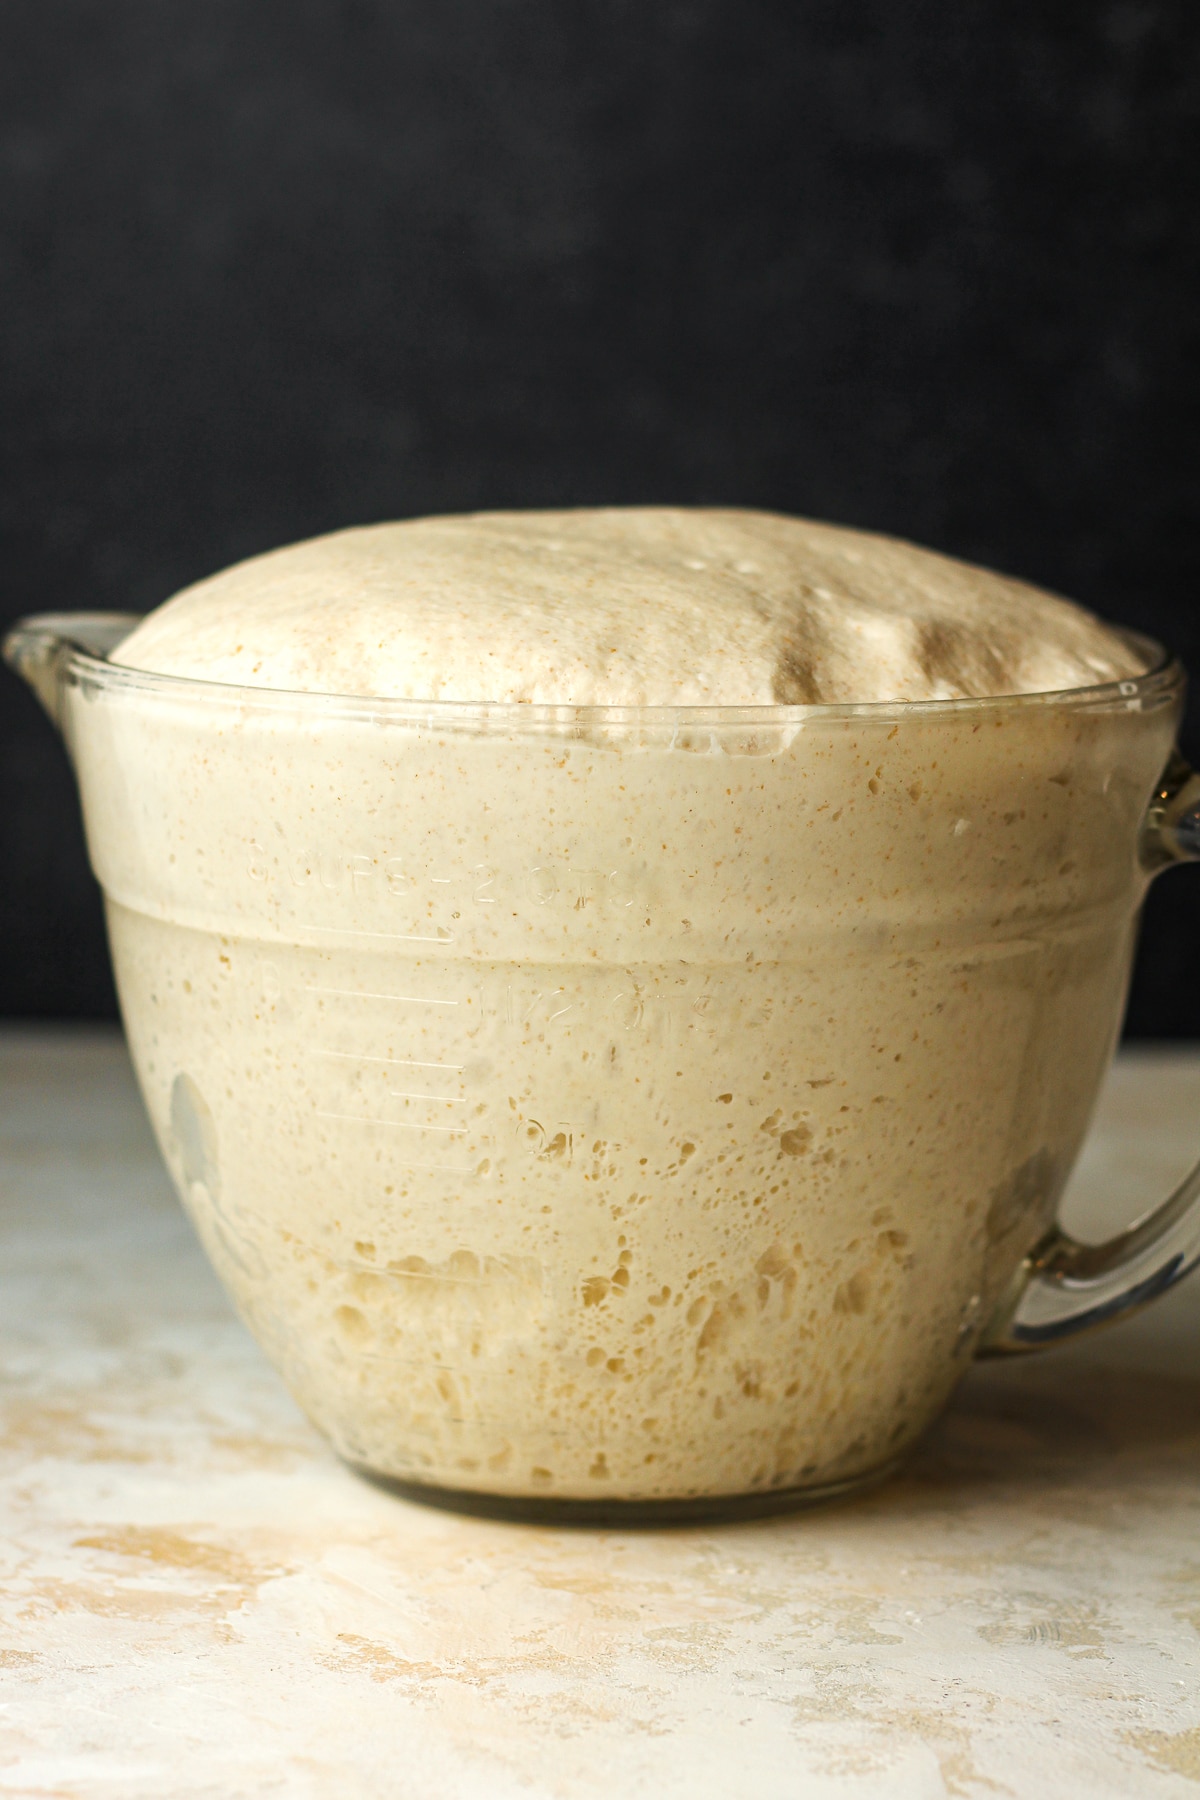 A large measuring cup of the sourdough.